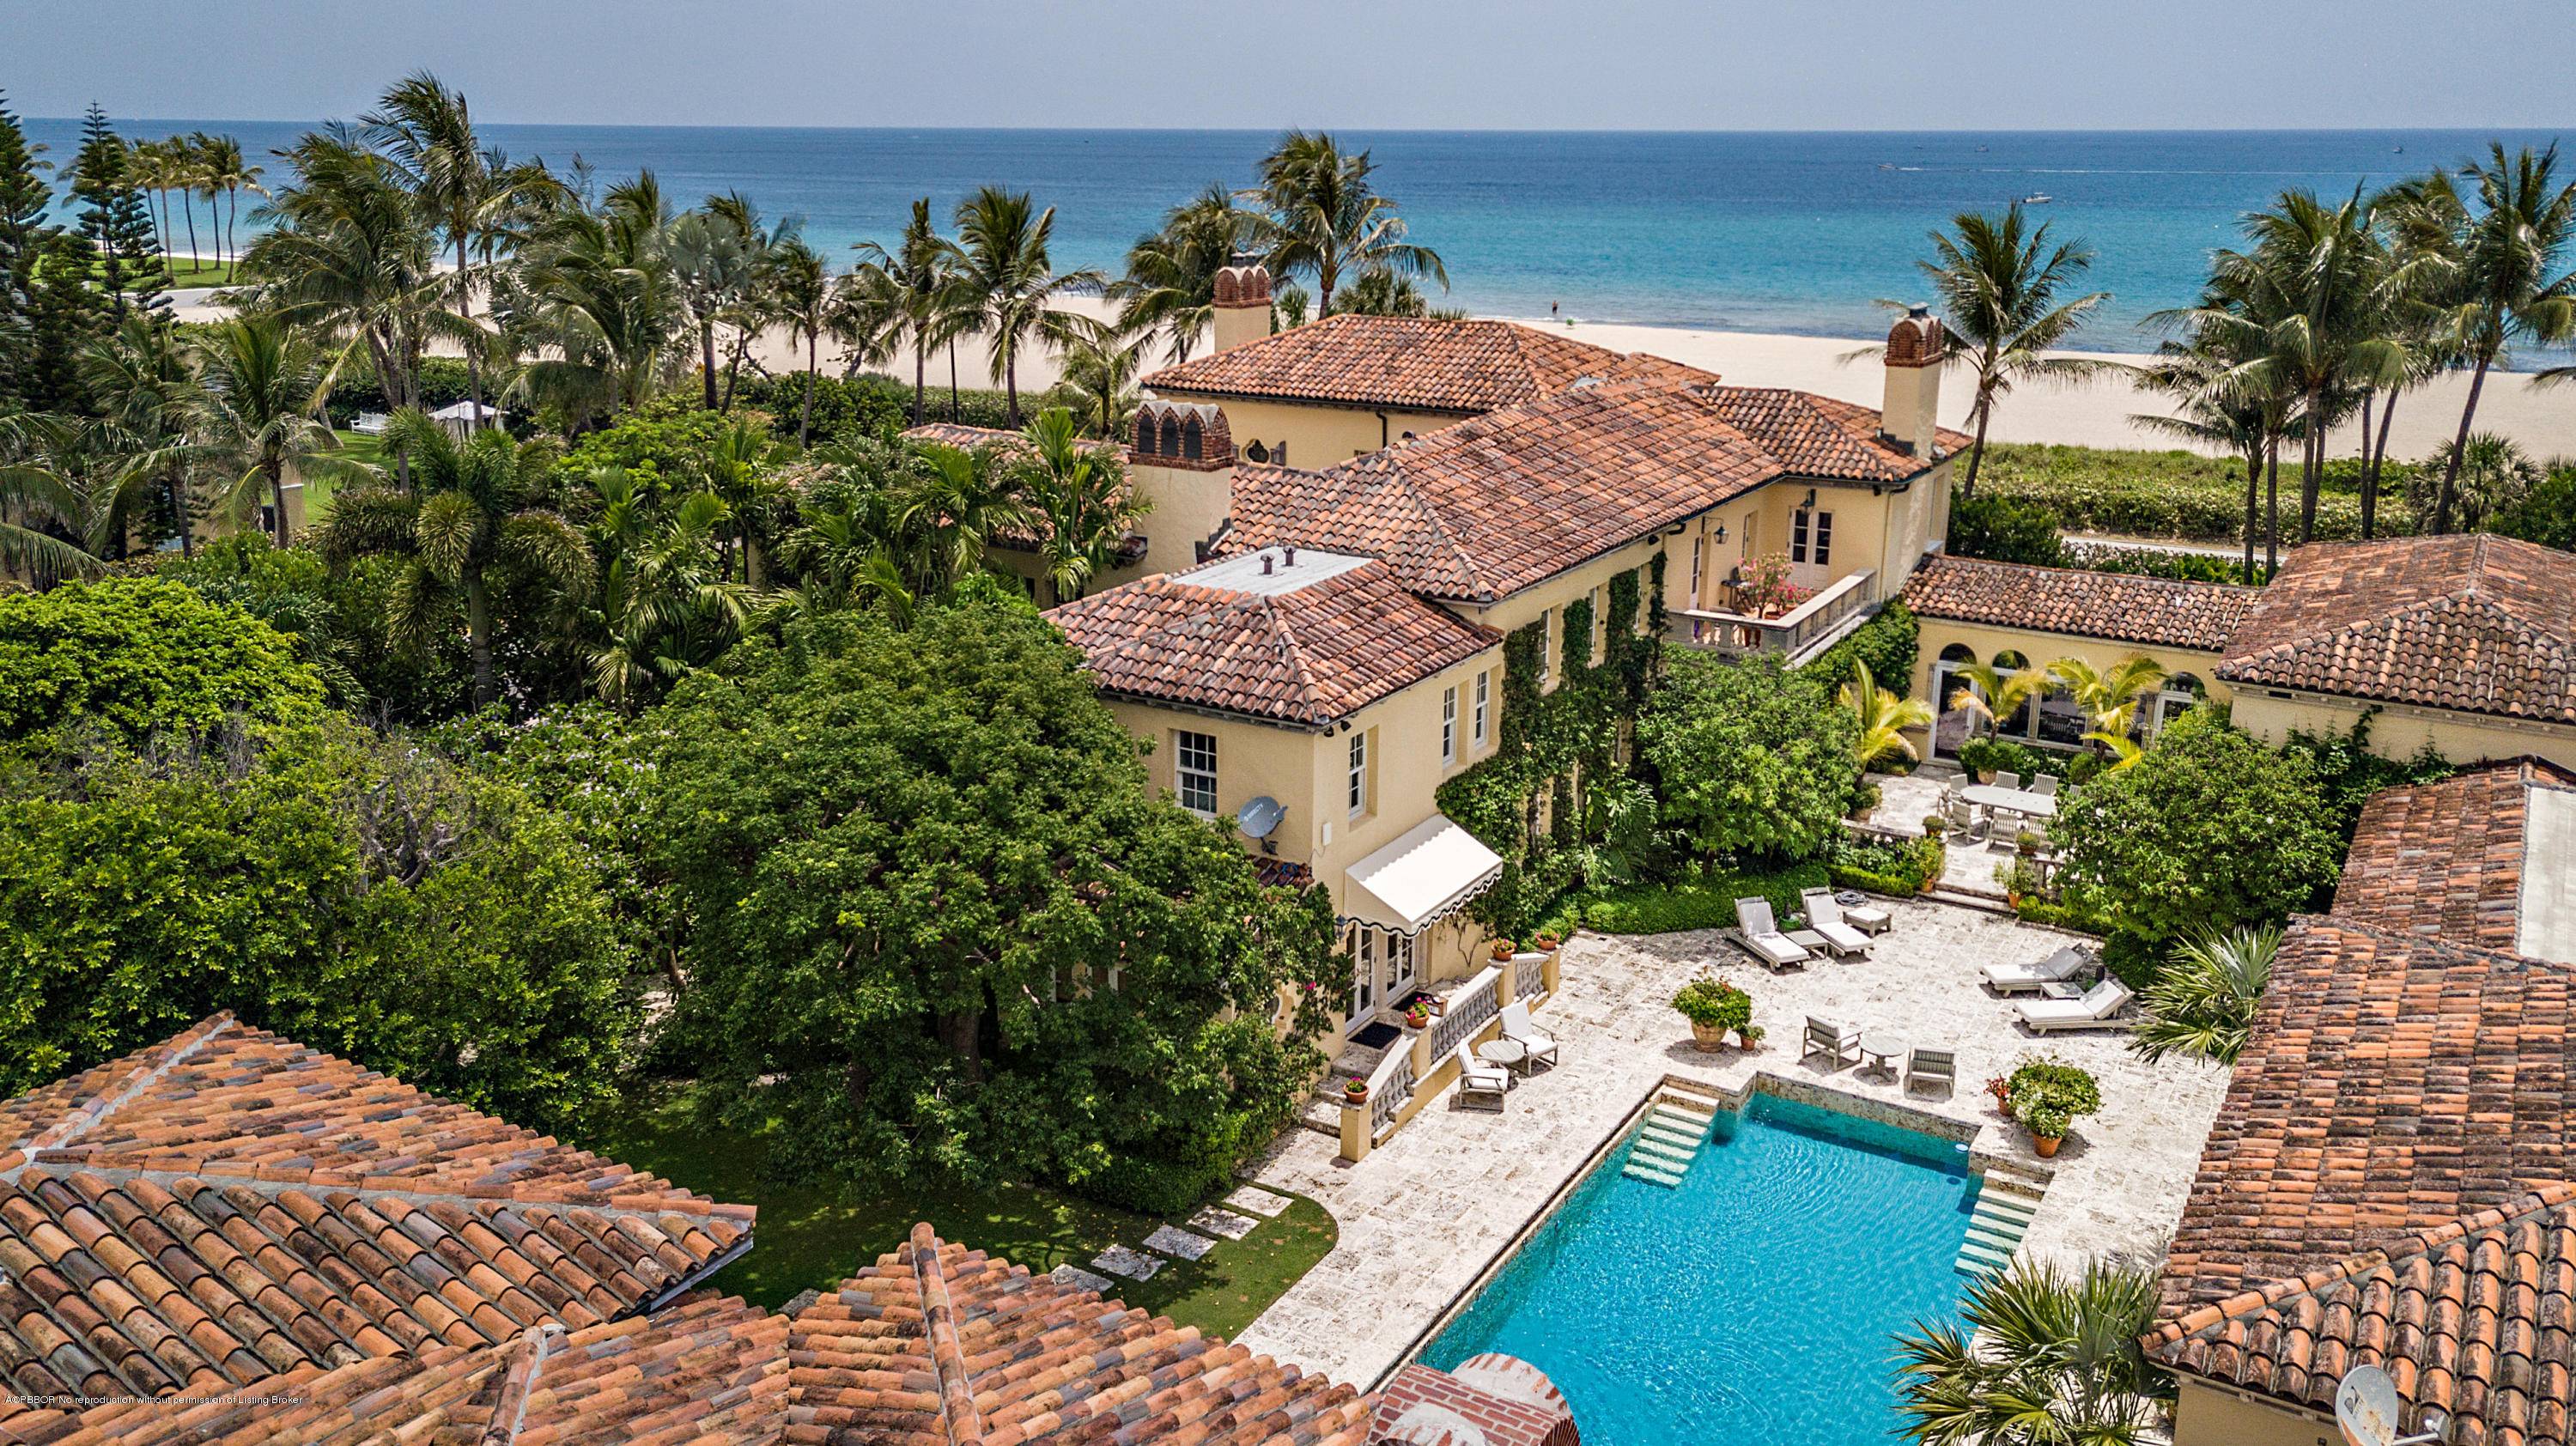 ICONIC Palm BeachRarely does one have the chance to purchase such an important estate on Palm Beach located on the corner of Main and Main.